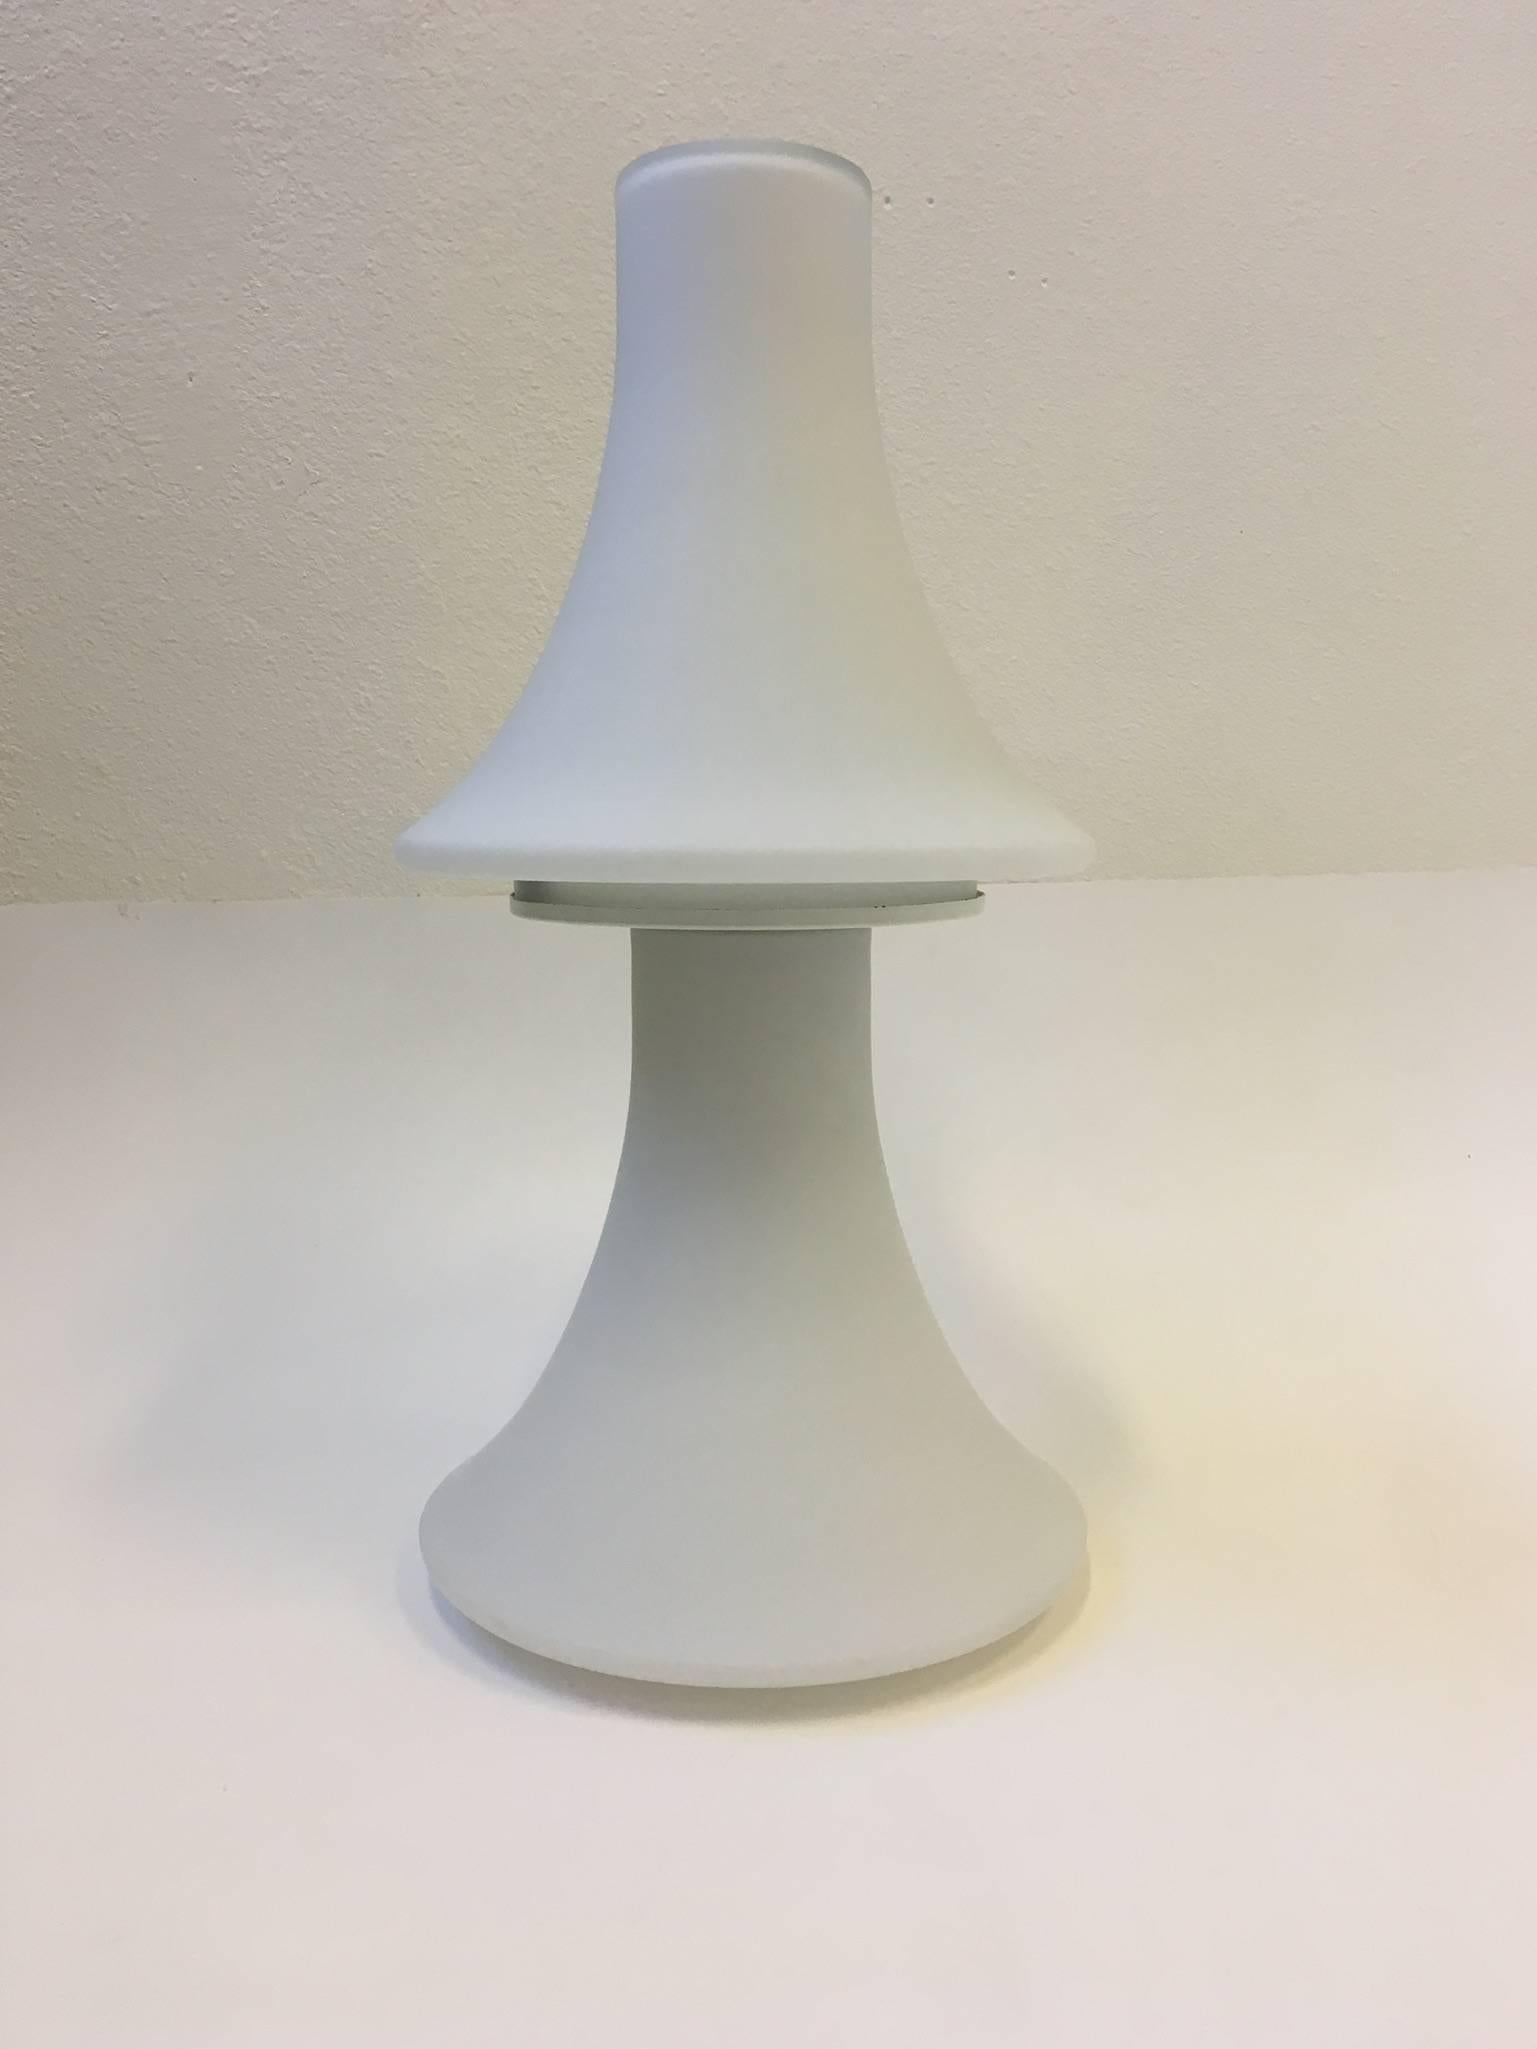 A rare sculptural shape white frosted glass table lamp, designed in the 1960s by Laurel Lamp Company.
The lamp has been newly rewired with a full range dimmer control on the wire. 
The lamp takes two regular Edison light bulbs. One for the base